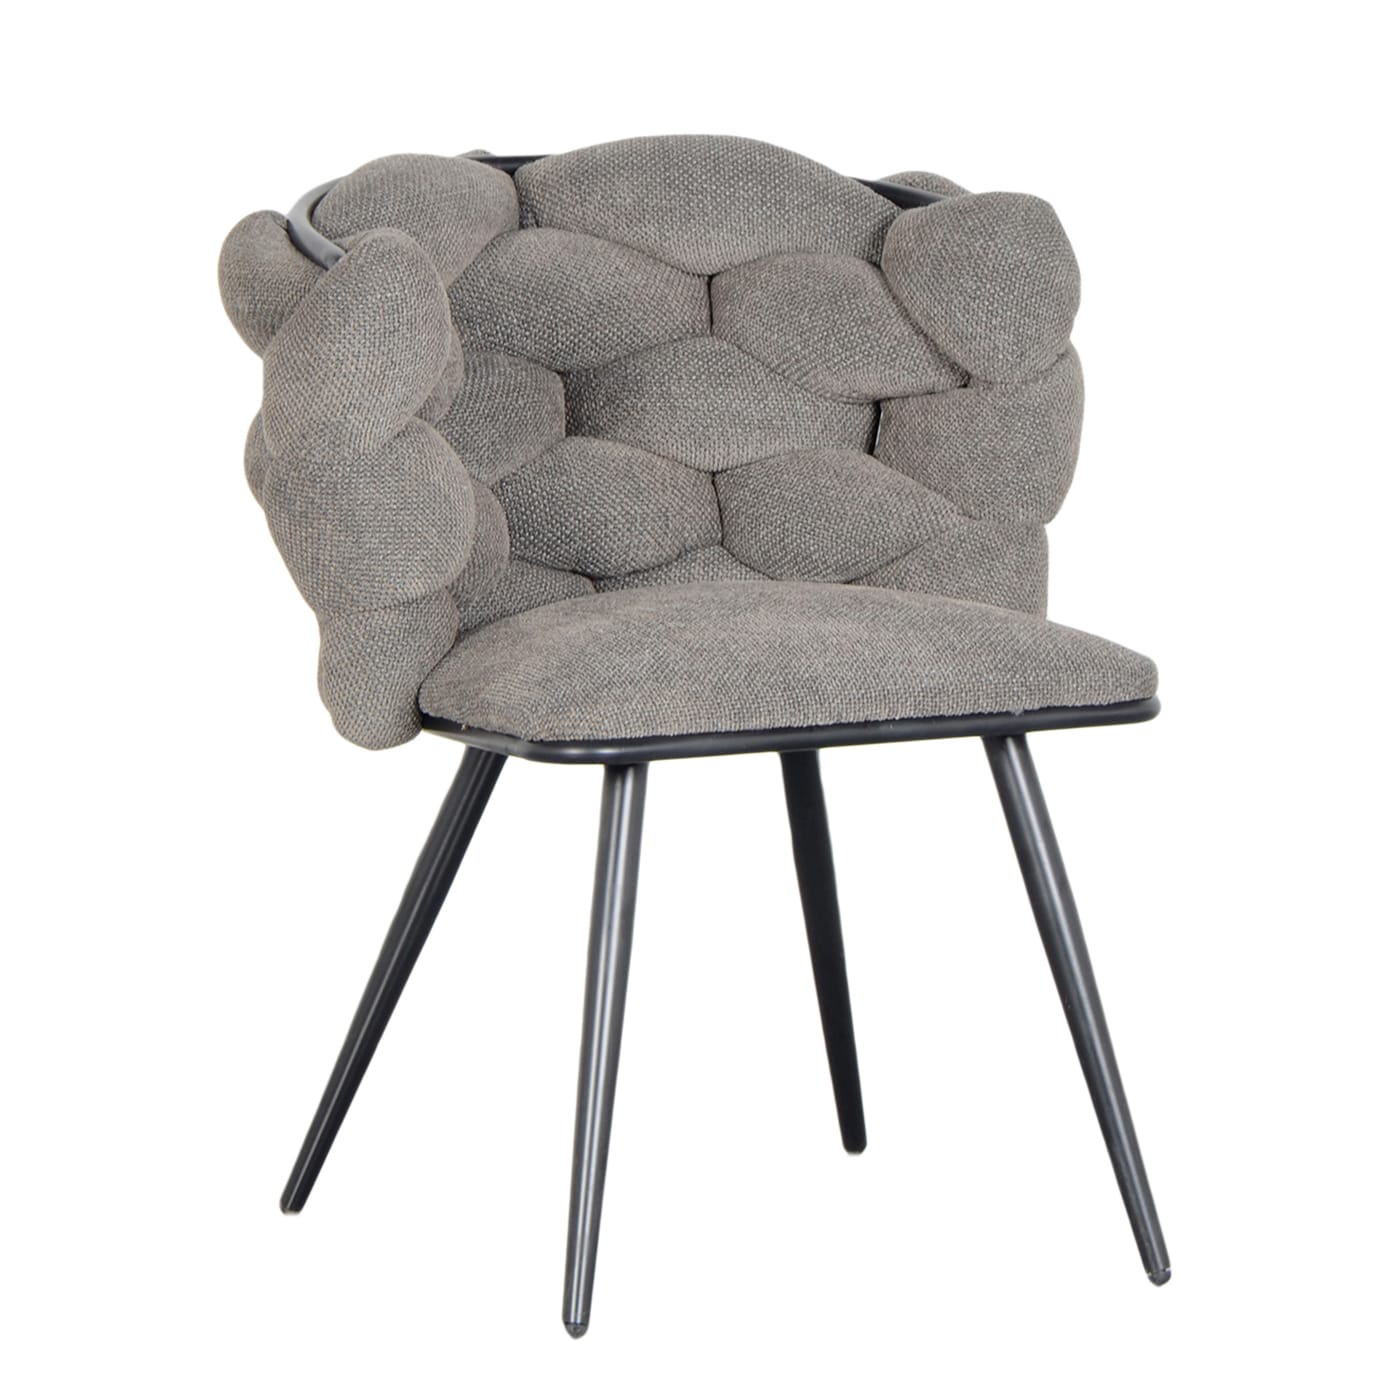 Rock chair chenille taupe